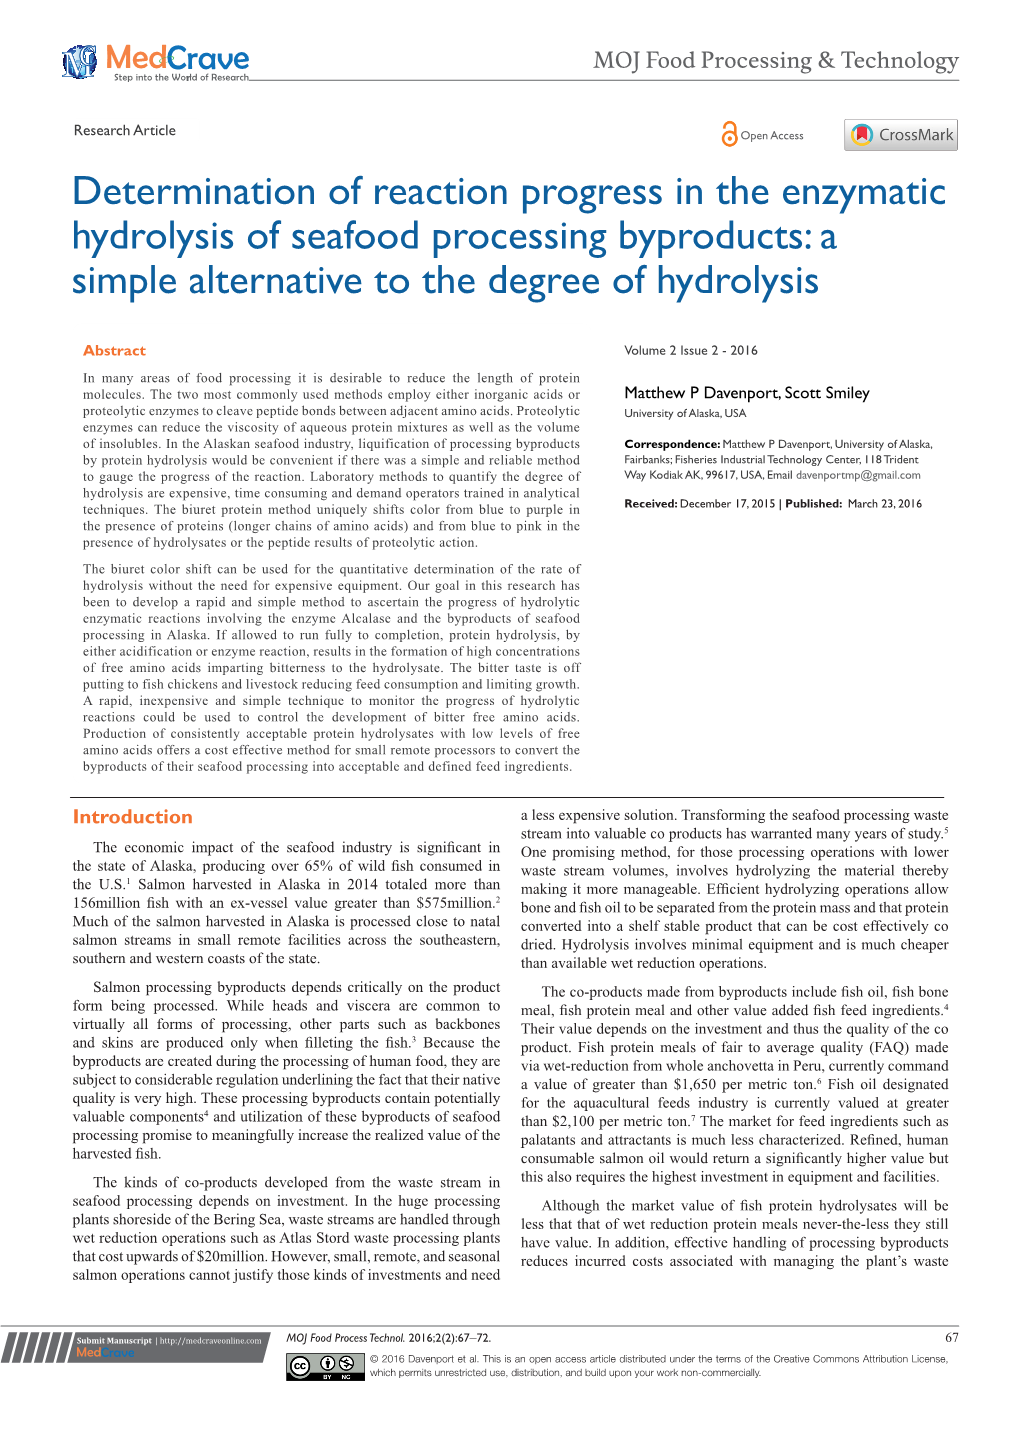 Determination of Reaction Progress in the Enzymatic Hydrolysis of Seafood Processing Byproducts: a Simple Alternative to the Degree of Hydrolysis